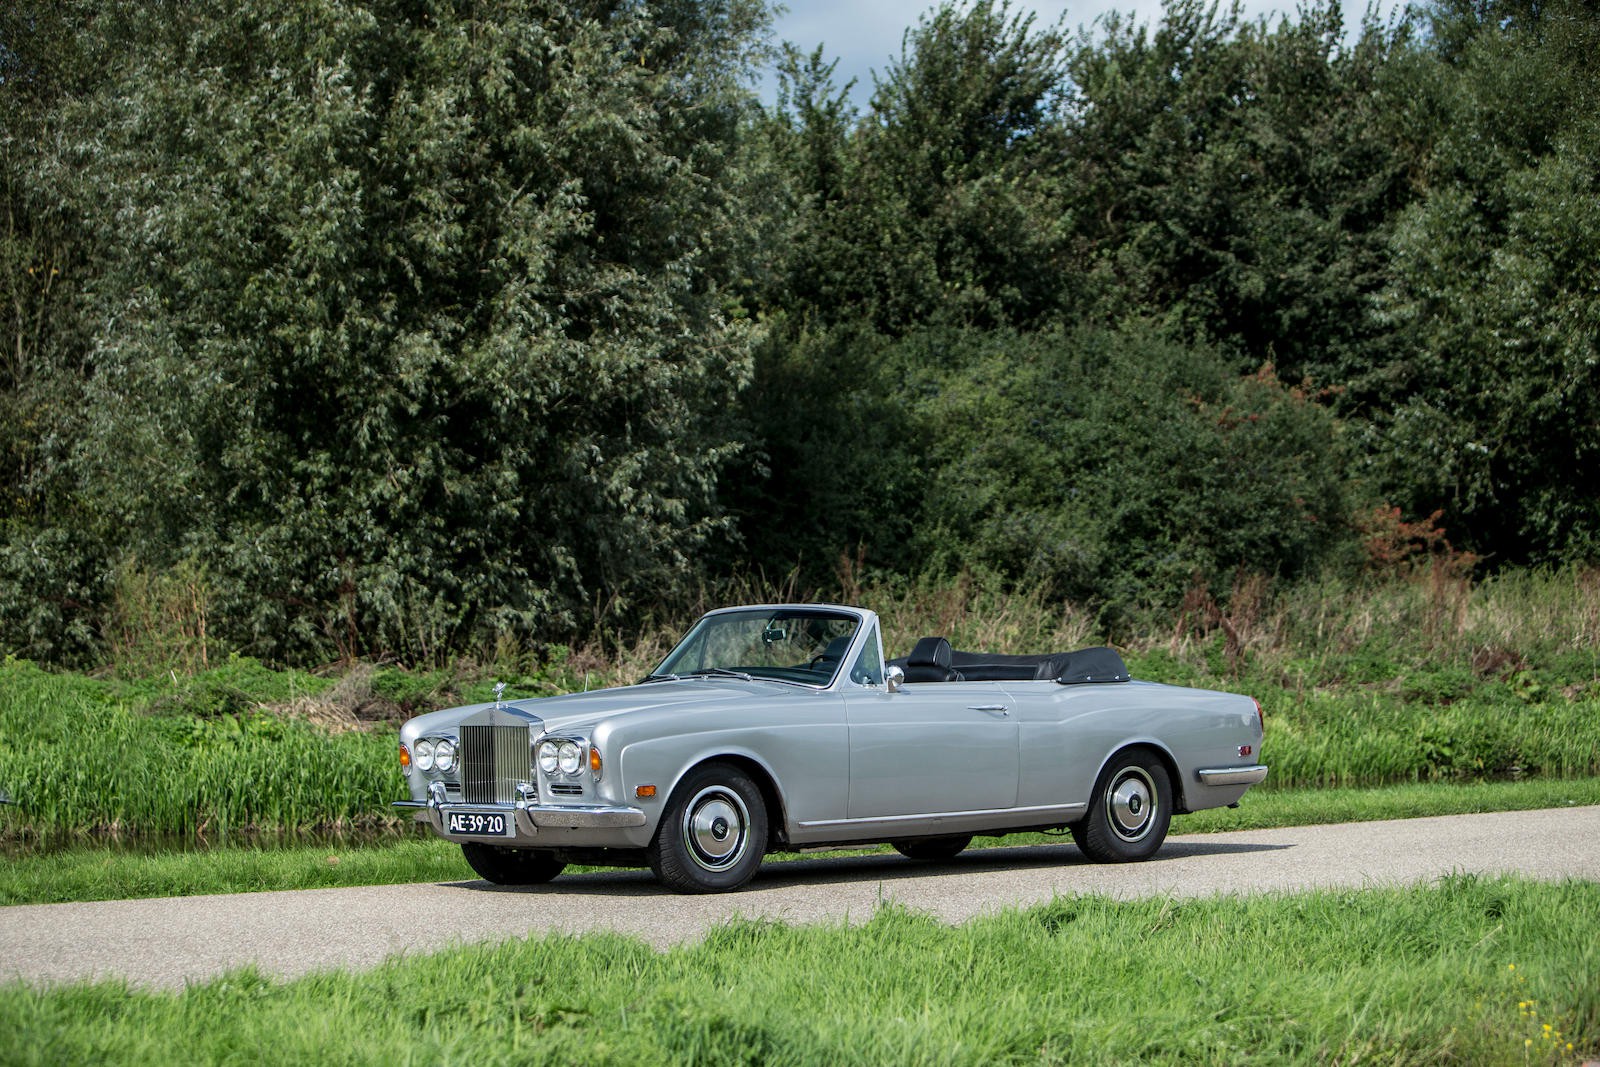 Rolls Royce Silver Shadow  The Best Car In The World 1979 Silver Shadow 2  Road Test  YouTube